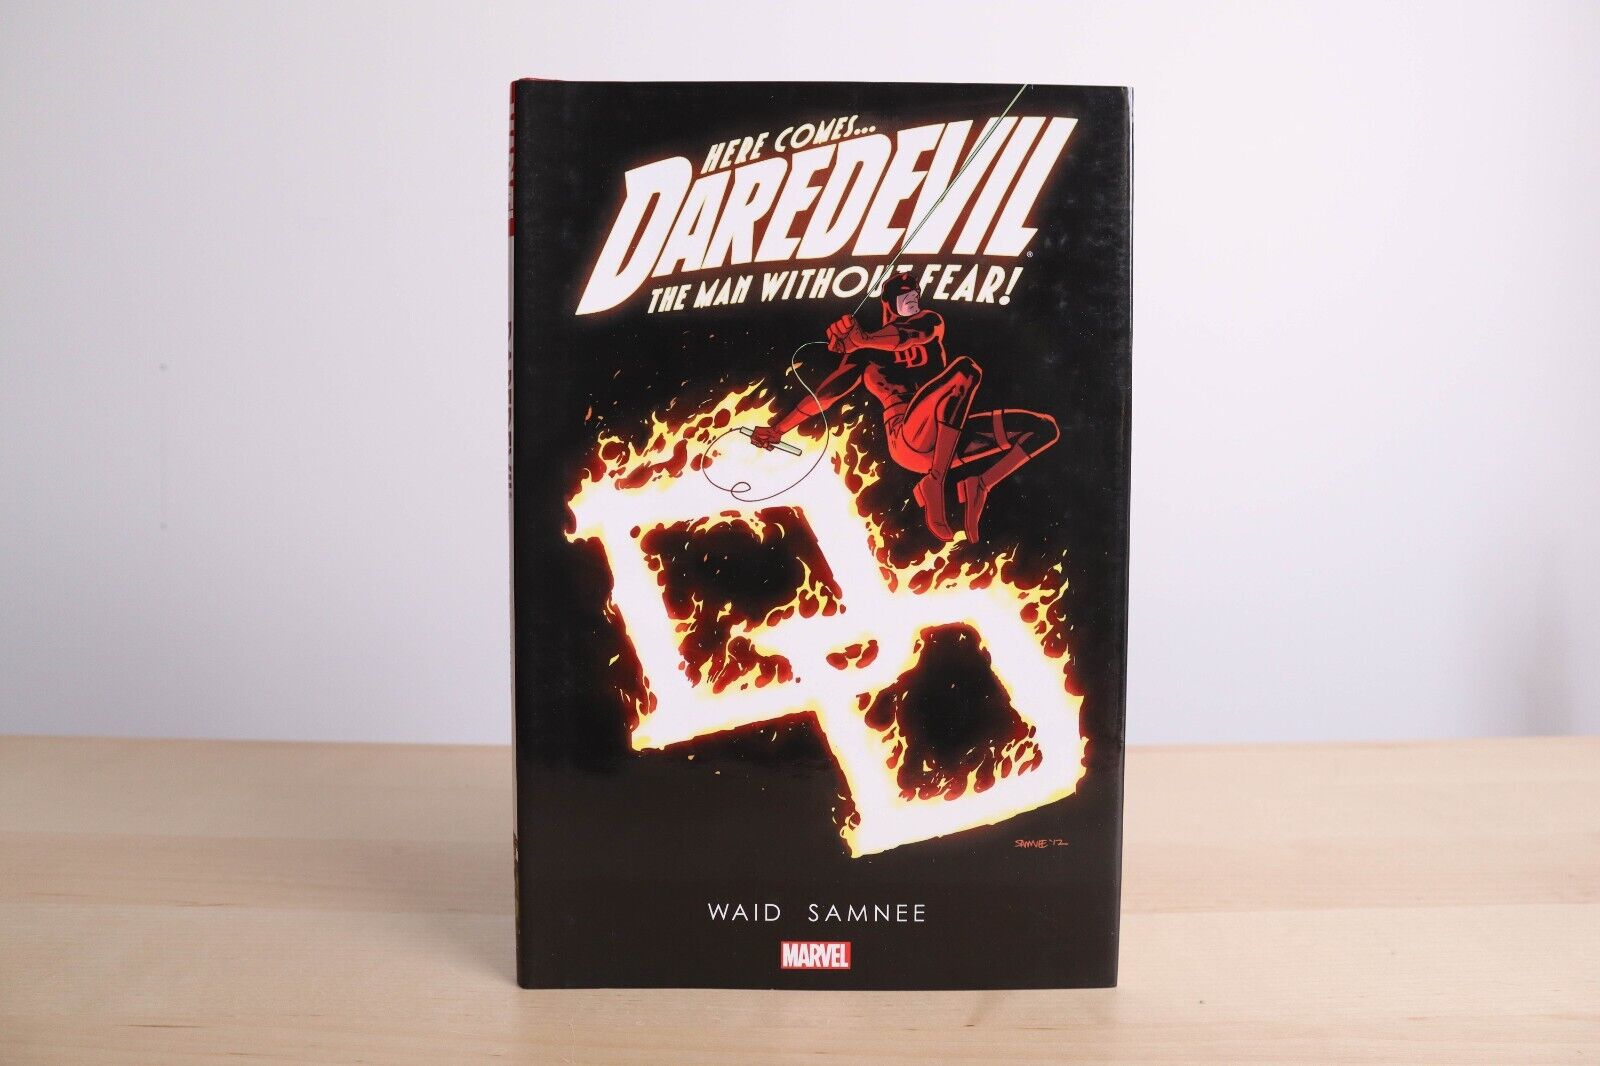 Marvel Comics: Here Comes Dardevil The Man Without Fear Hardcover - 2013